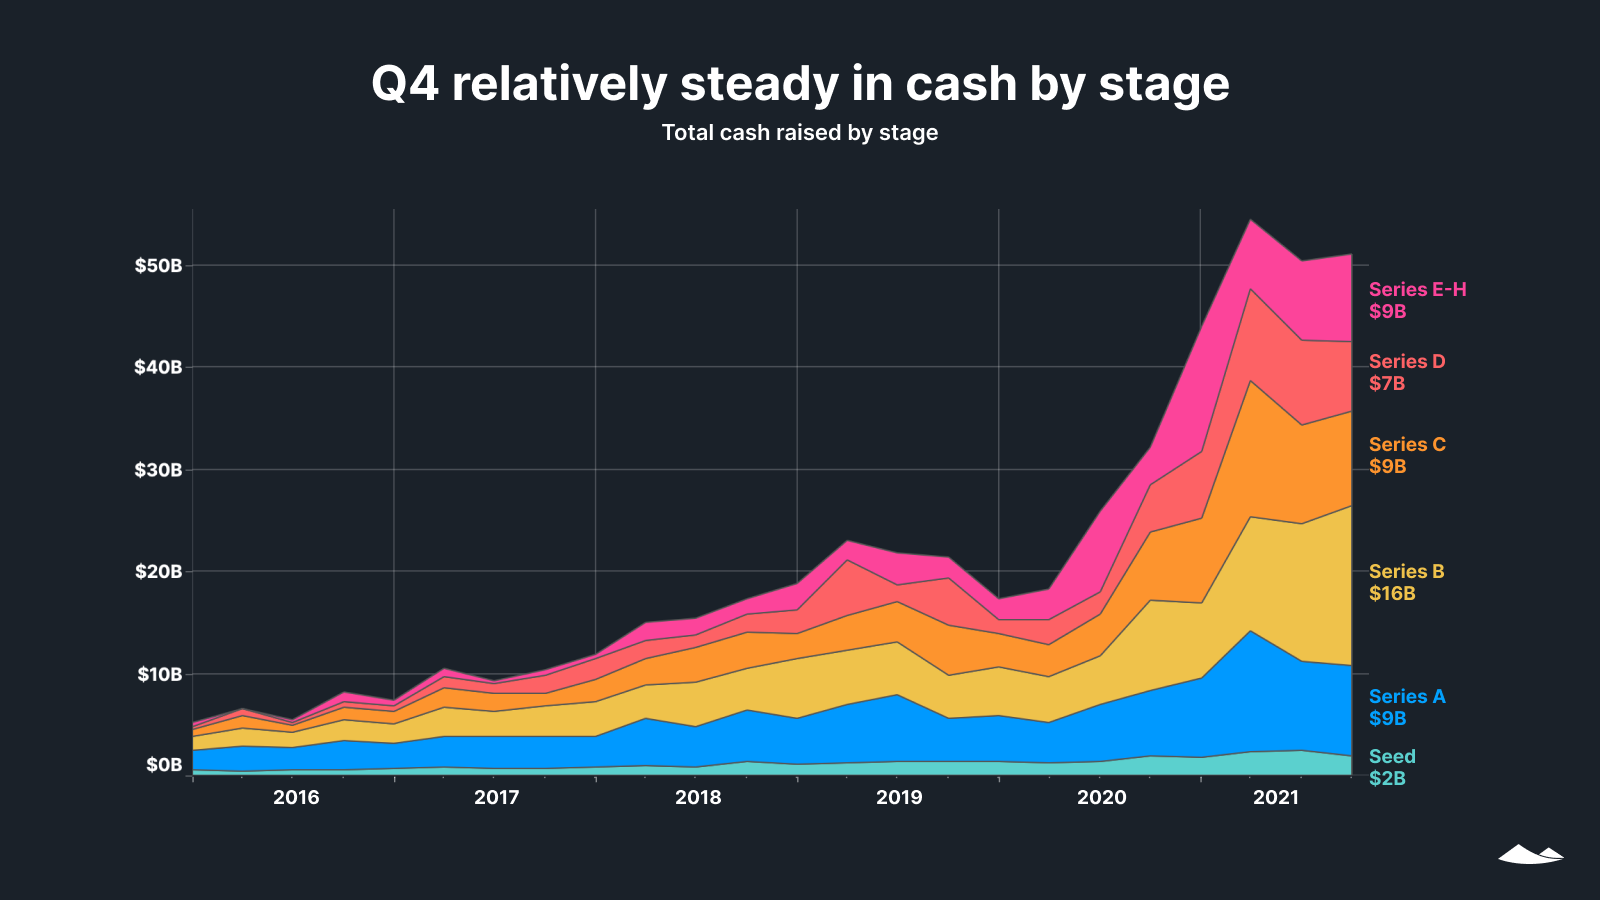 Q4 relatively steady in cash by stage: Total cash raised by stage and quarter, 2016-21